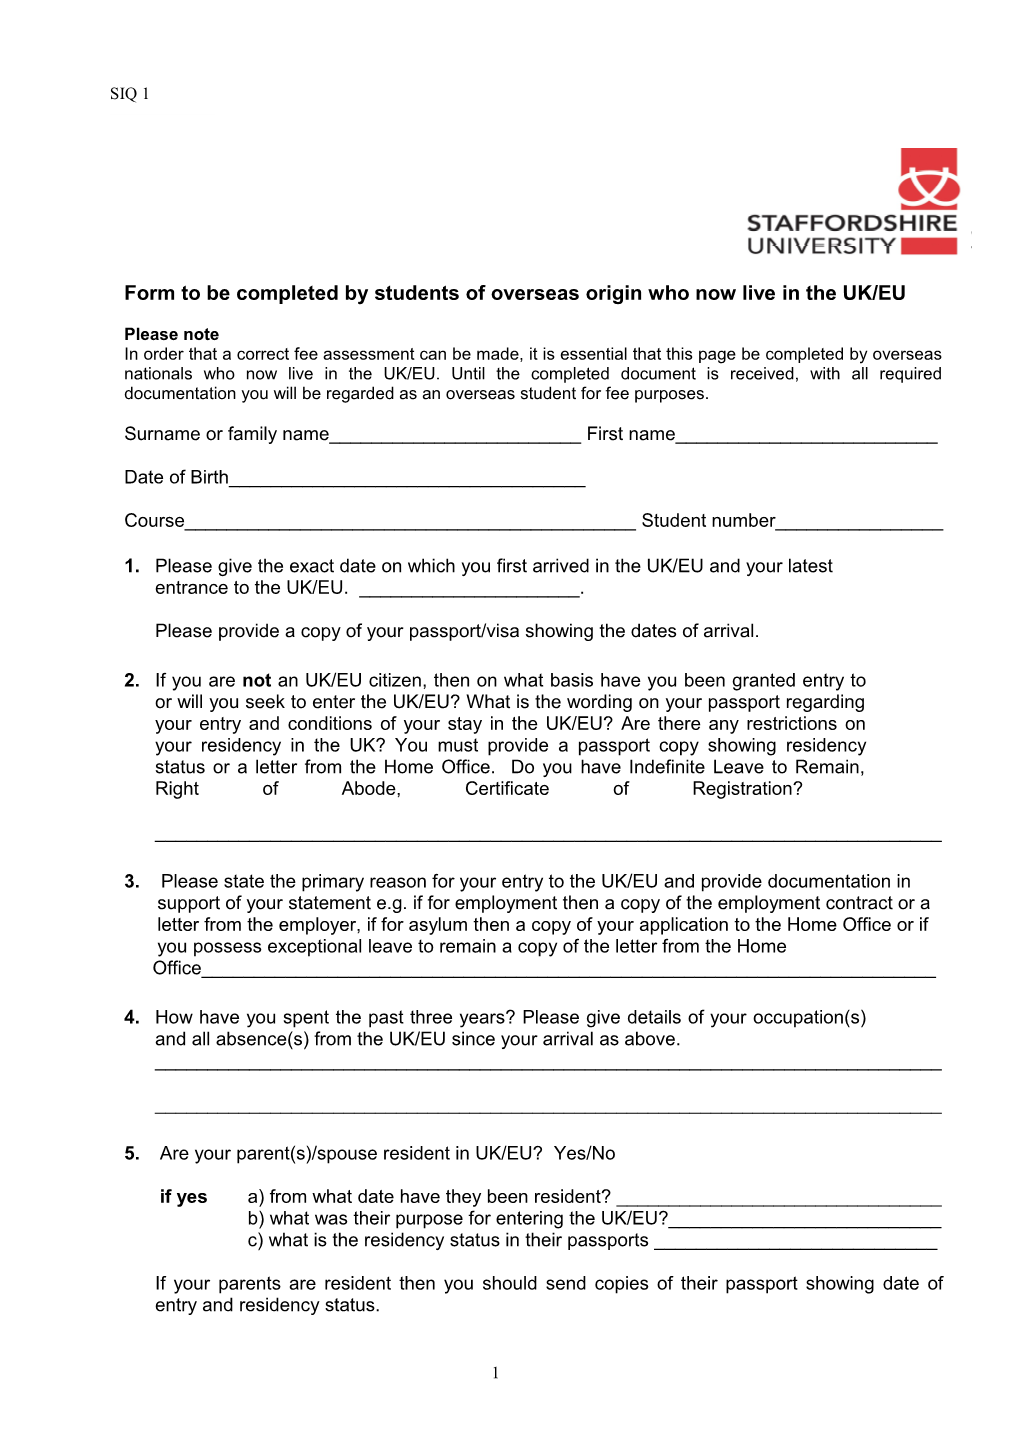 Form to Be Completed by Students of Overseas Origin Who Now Live in the UK/EU